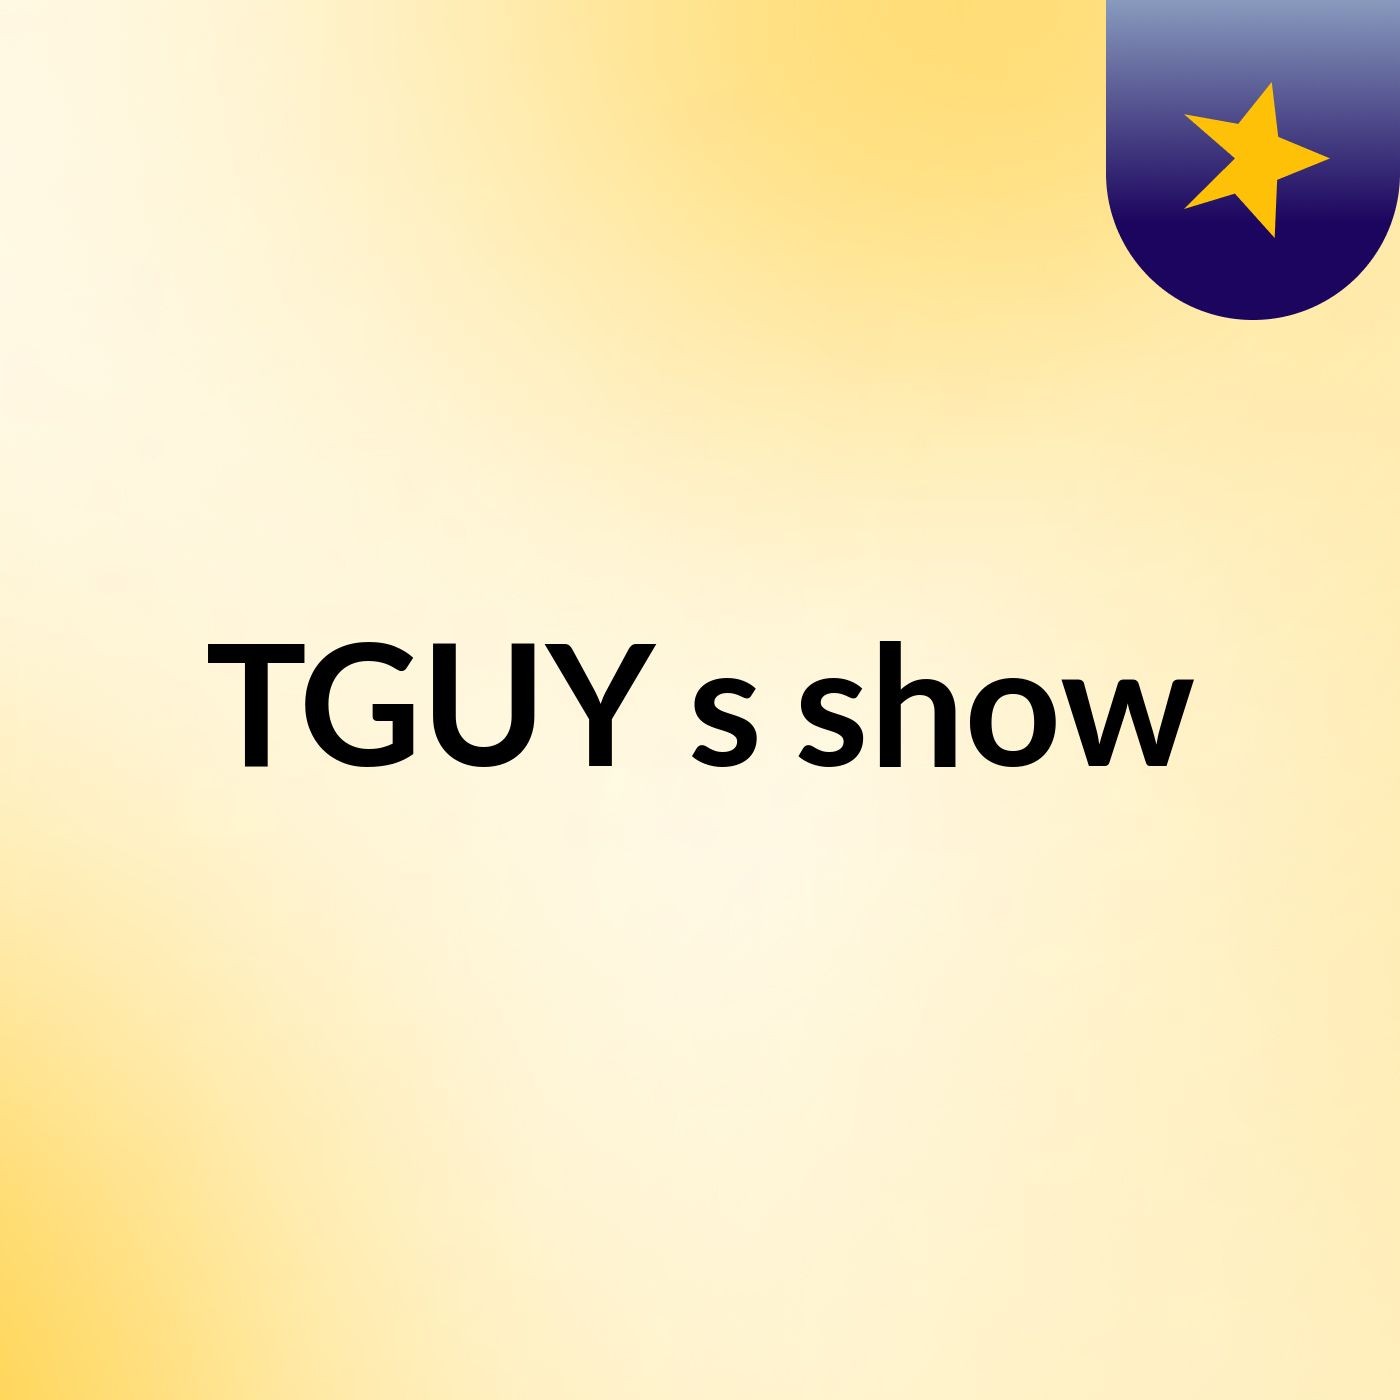 TGUY's show